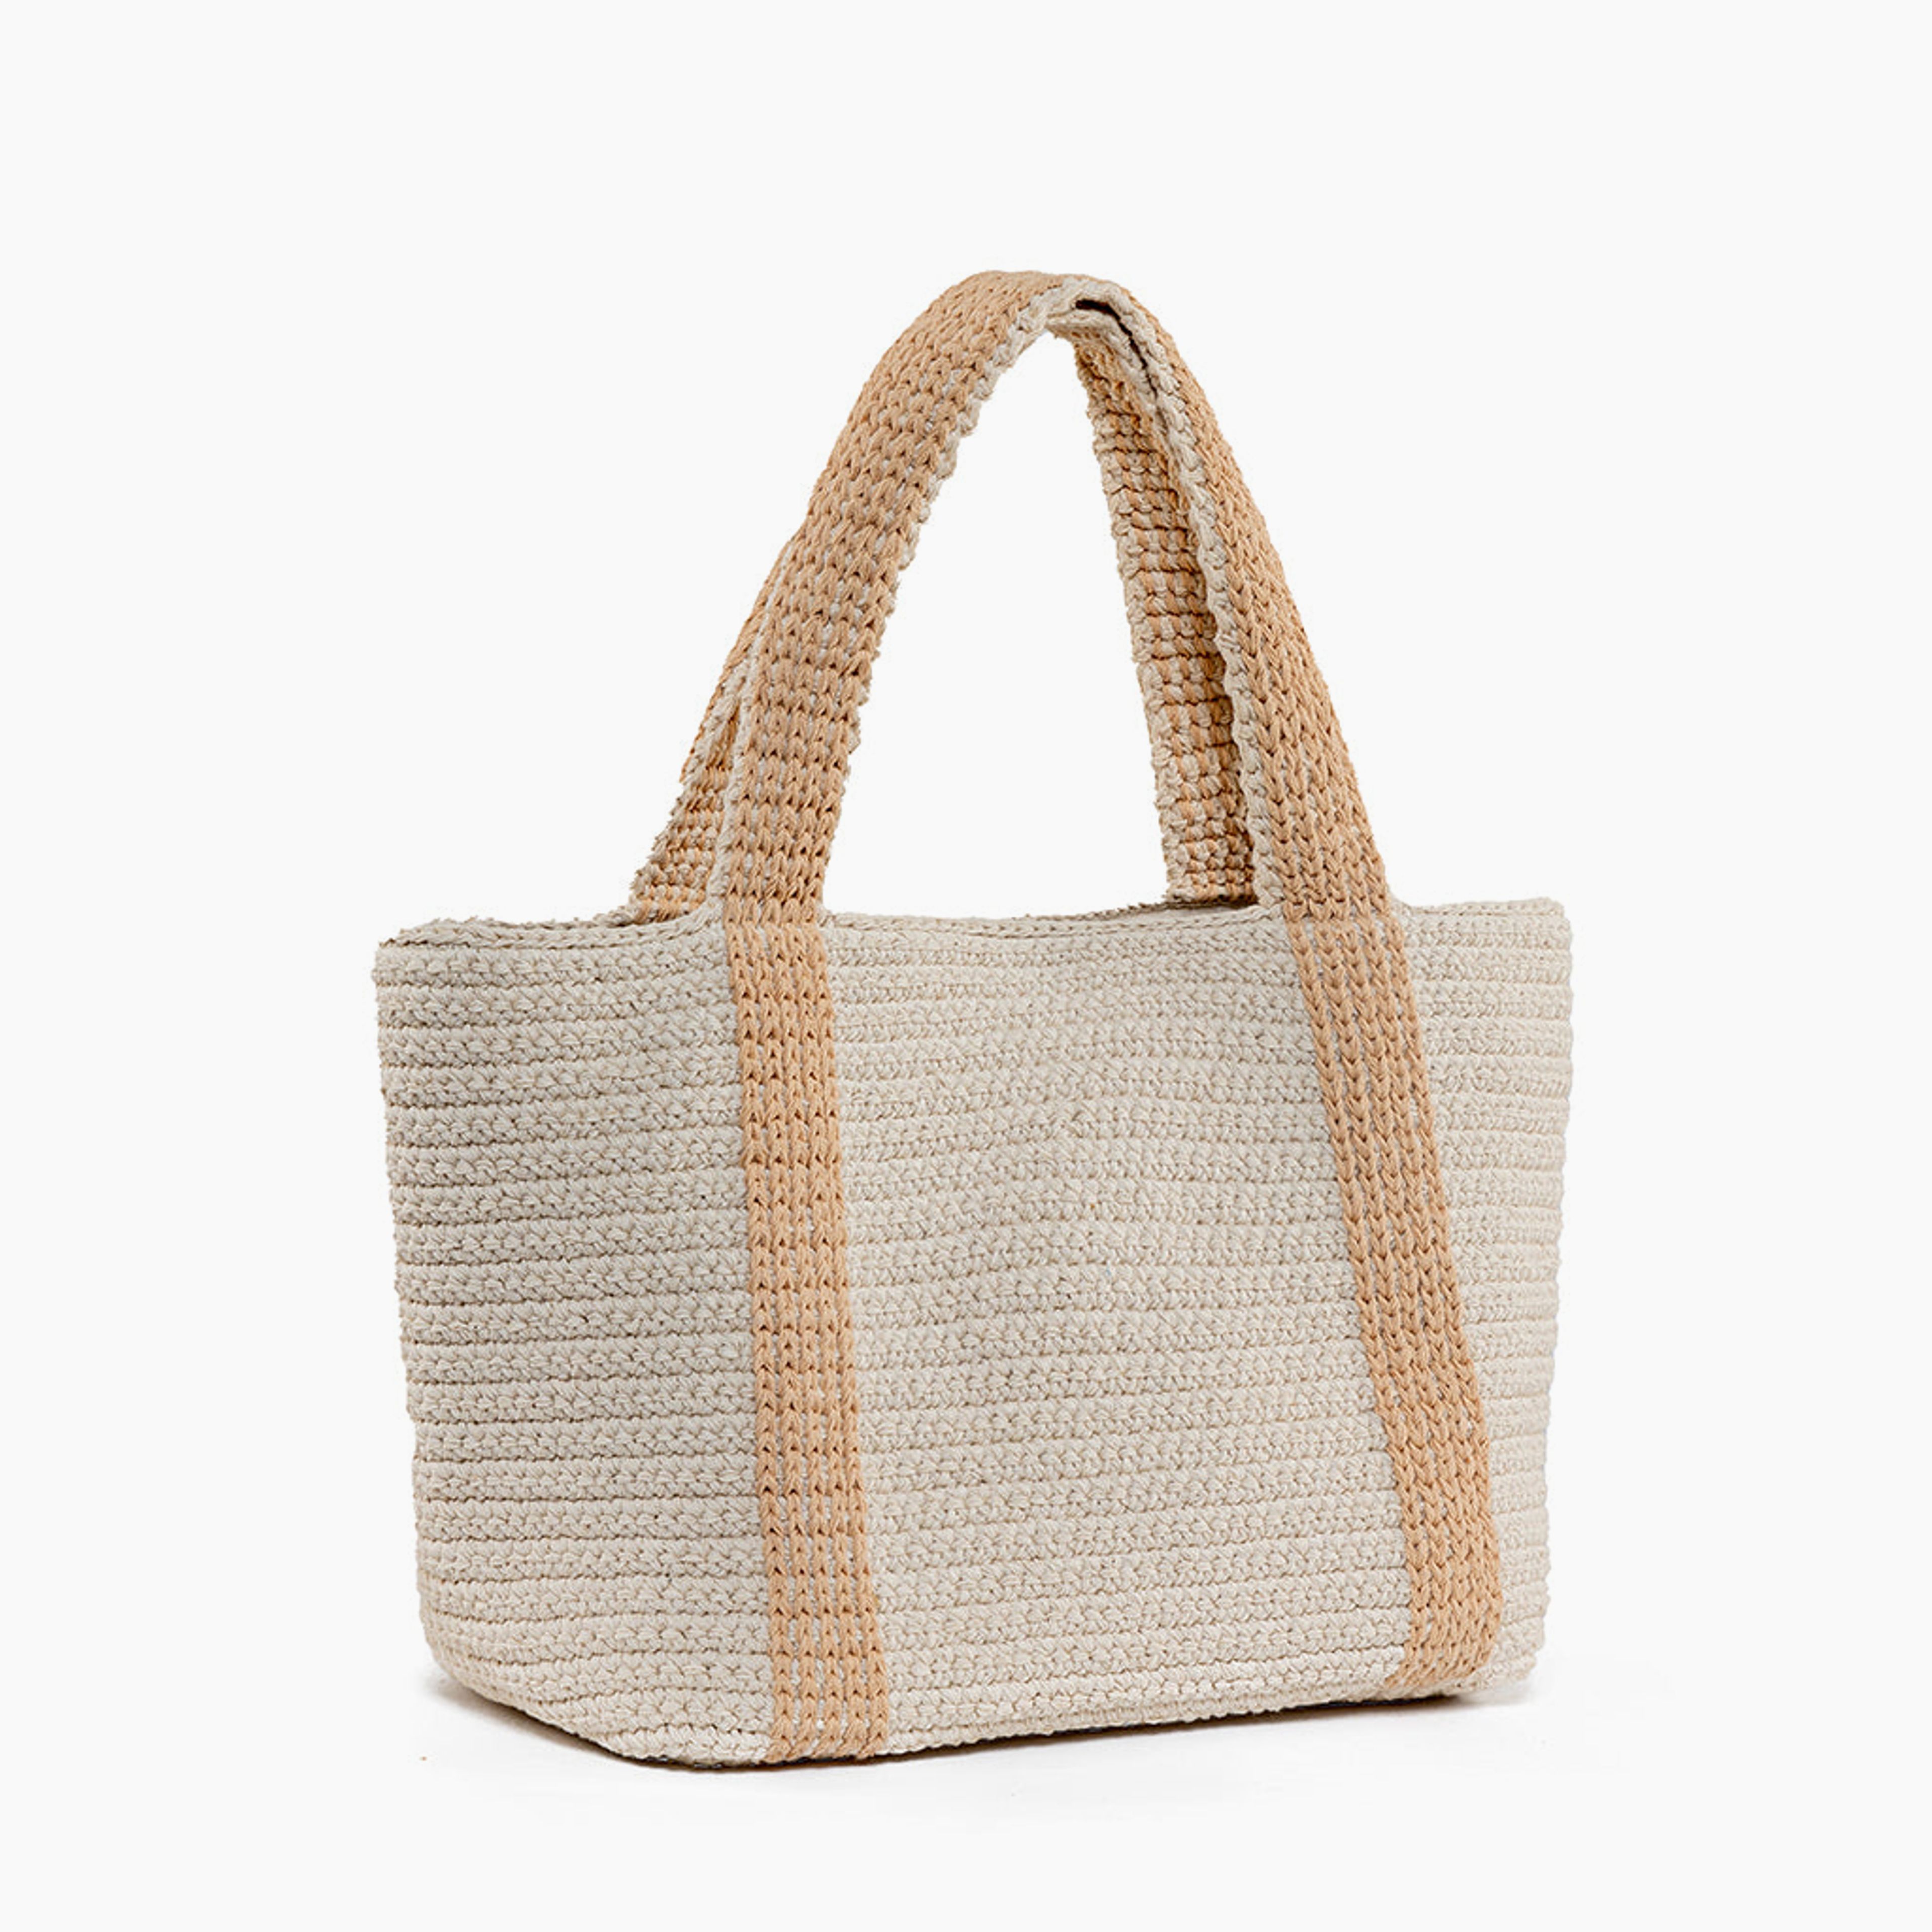 Madeline Crochet Tote Natural/Tan